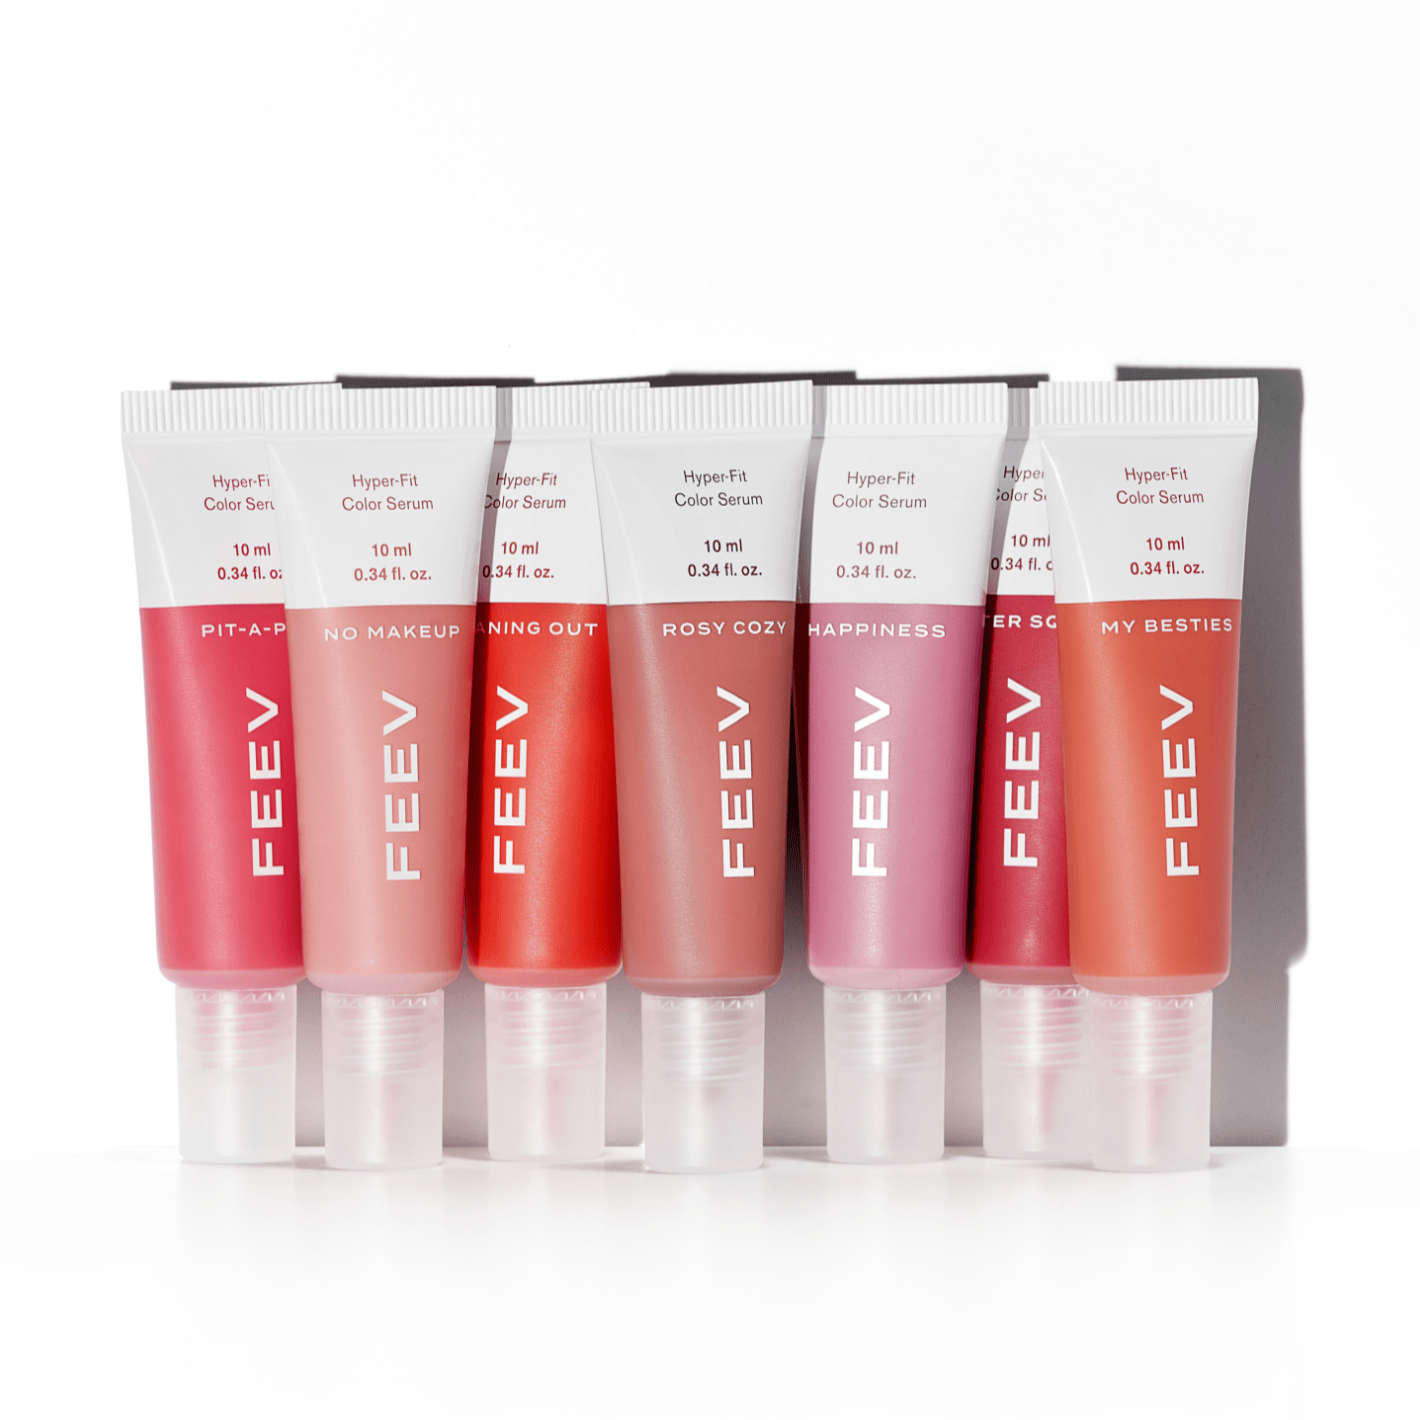 FEEV Hyper-Fit Color Serum Mini Blush on sales on our Website !